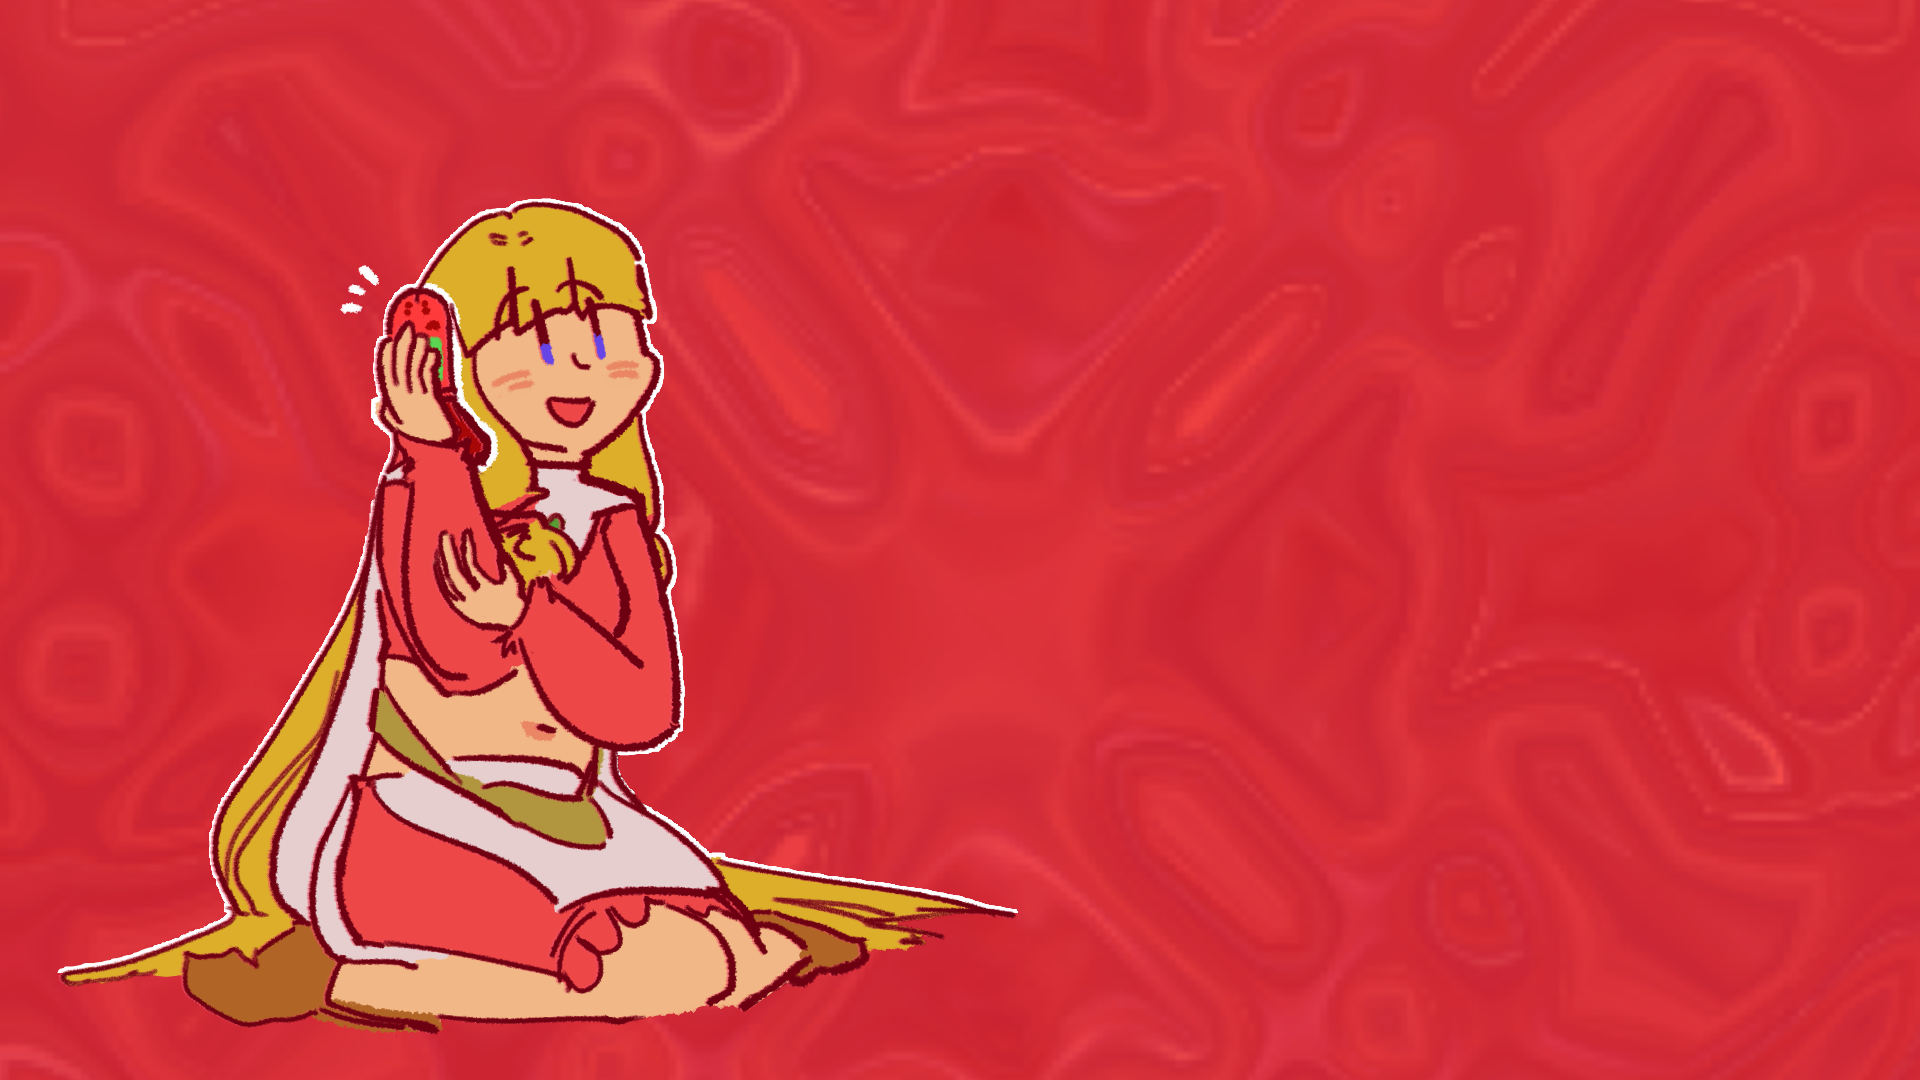 drawing of katia sitting down, knees splayed, happily listening to a red flip phone. there are symbols of excitement emanating off the phone. the background is a red fluid texture, taken from lost kingdoms' battle skybox.